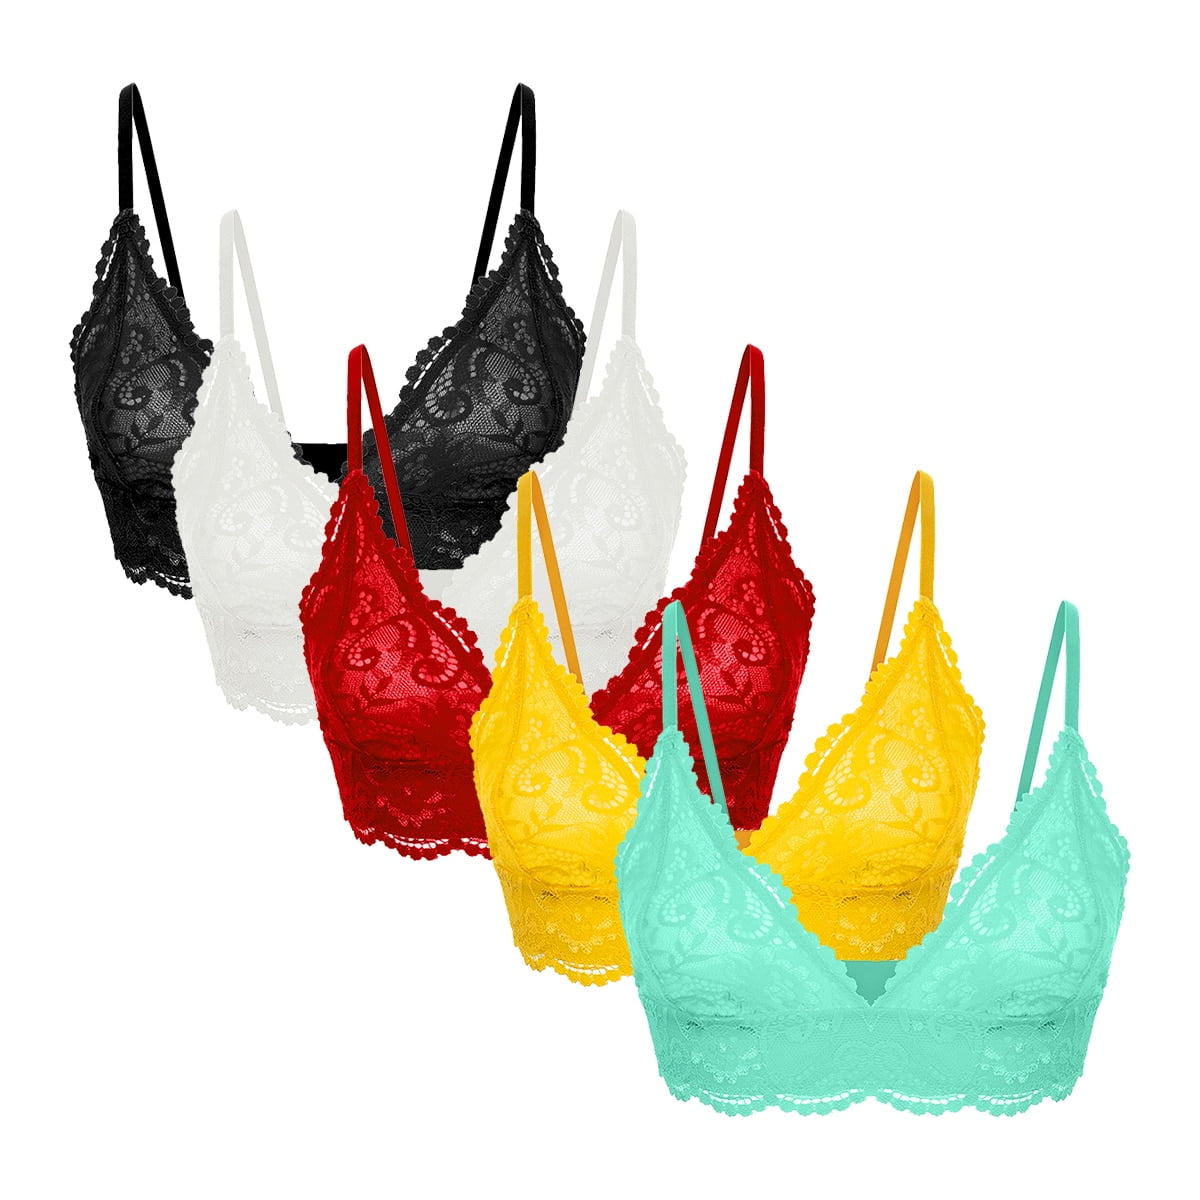 LAWOR Women's Triangle Cup Bras Lace Everyday Bra Wireless Thin